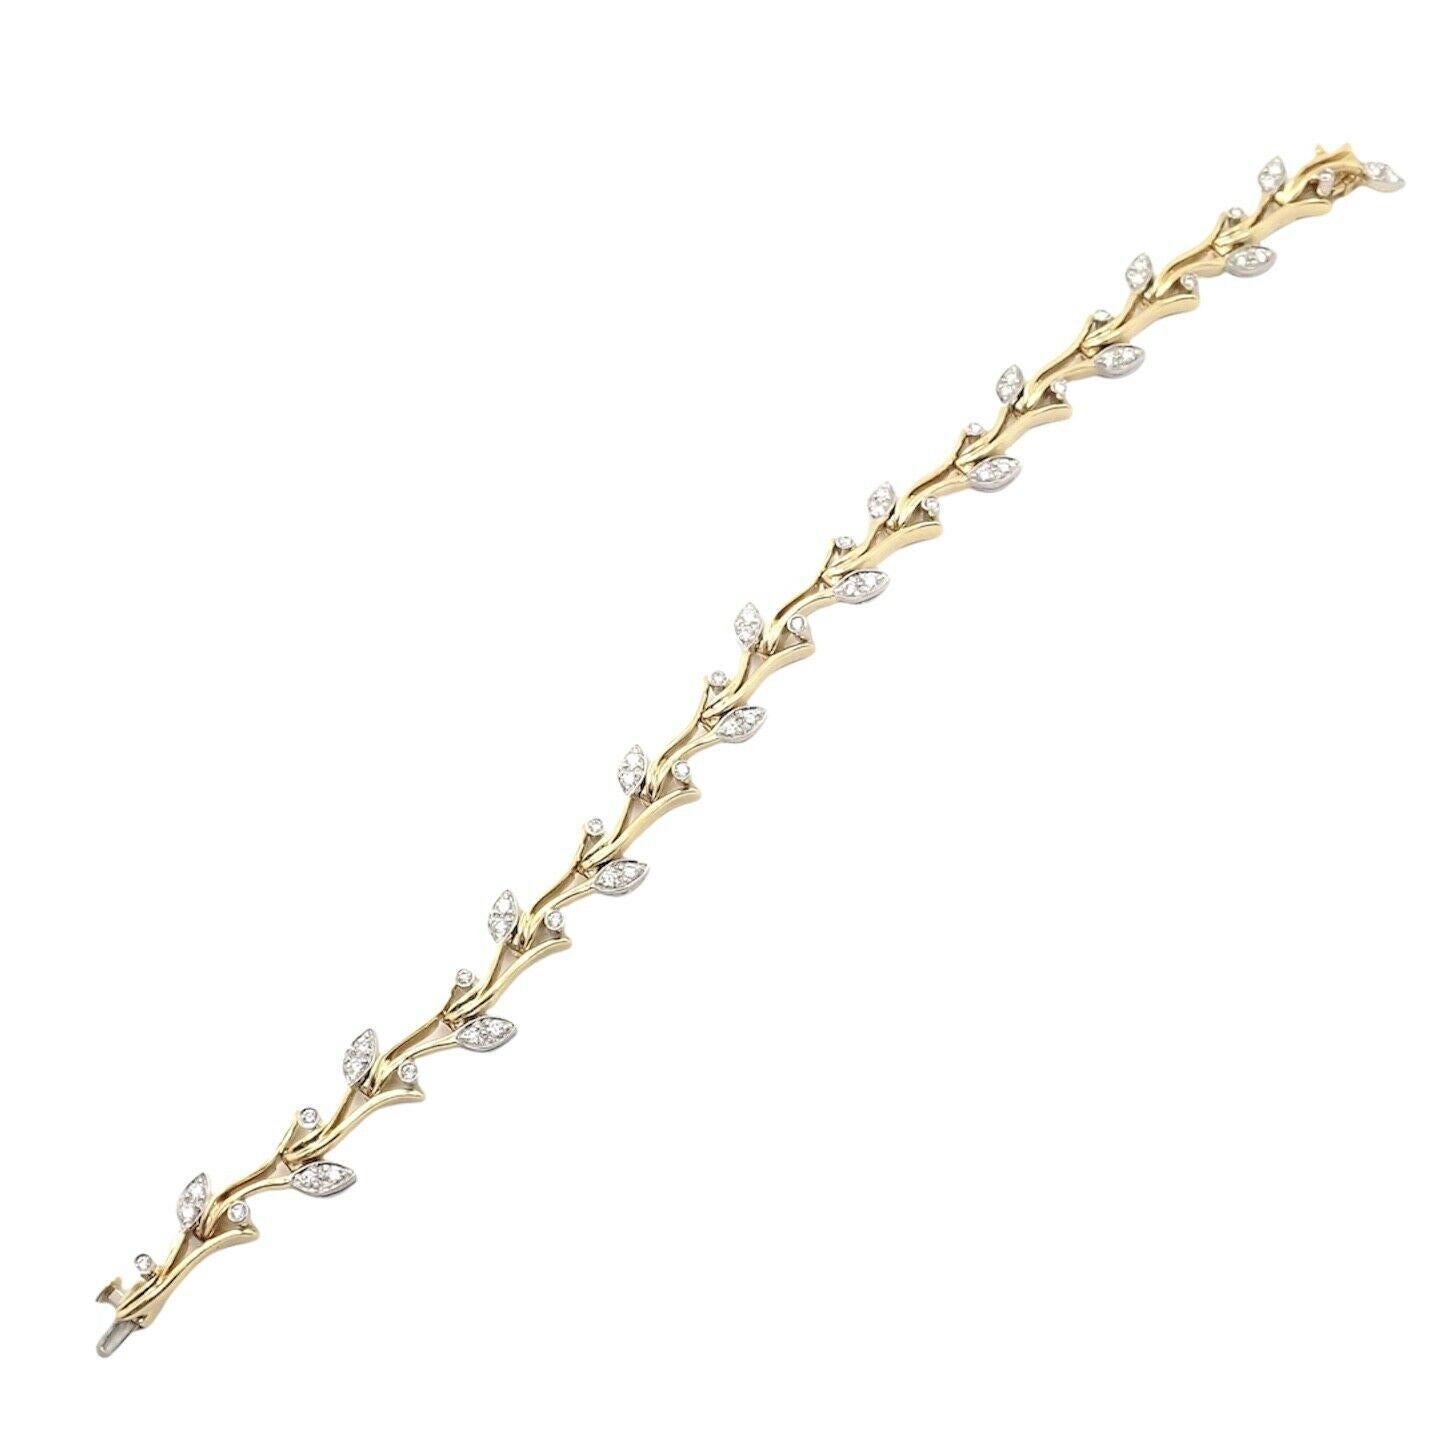 Yellow Gold And Platinum Diamond Tennis Bracelet by Tiffany & Co
With 54 round brilliant cut diamonds VS1 clarity, E color total weight approx. 2.25ct
Details:
Weight: 26.8 grams
Width: 11mm
Length: 7.25